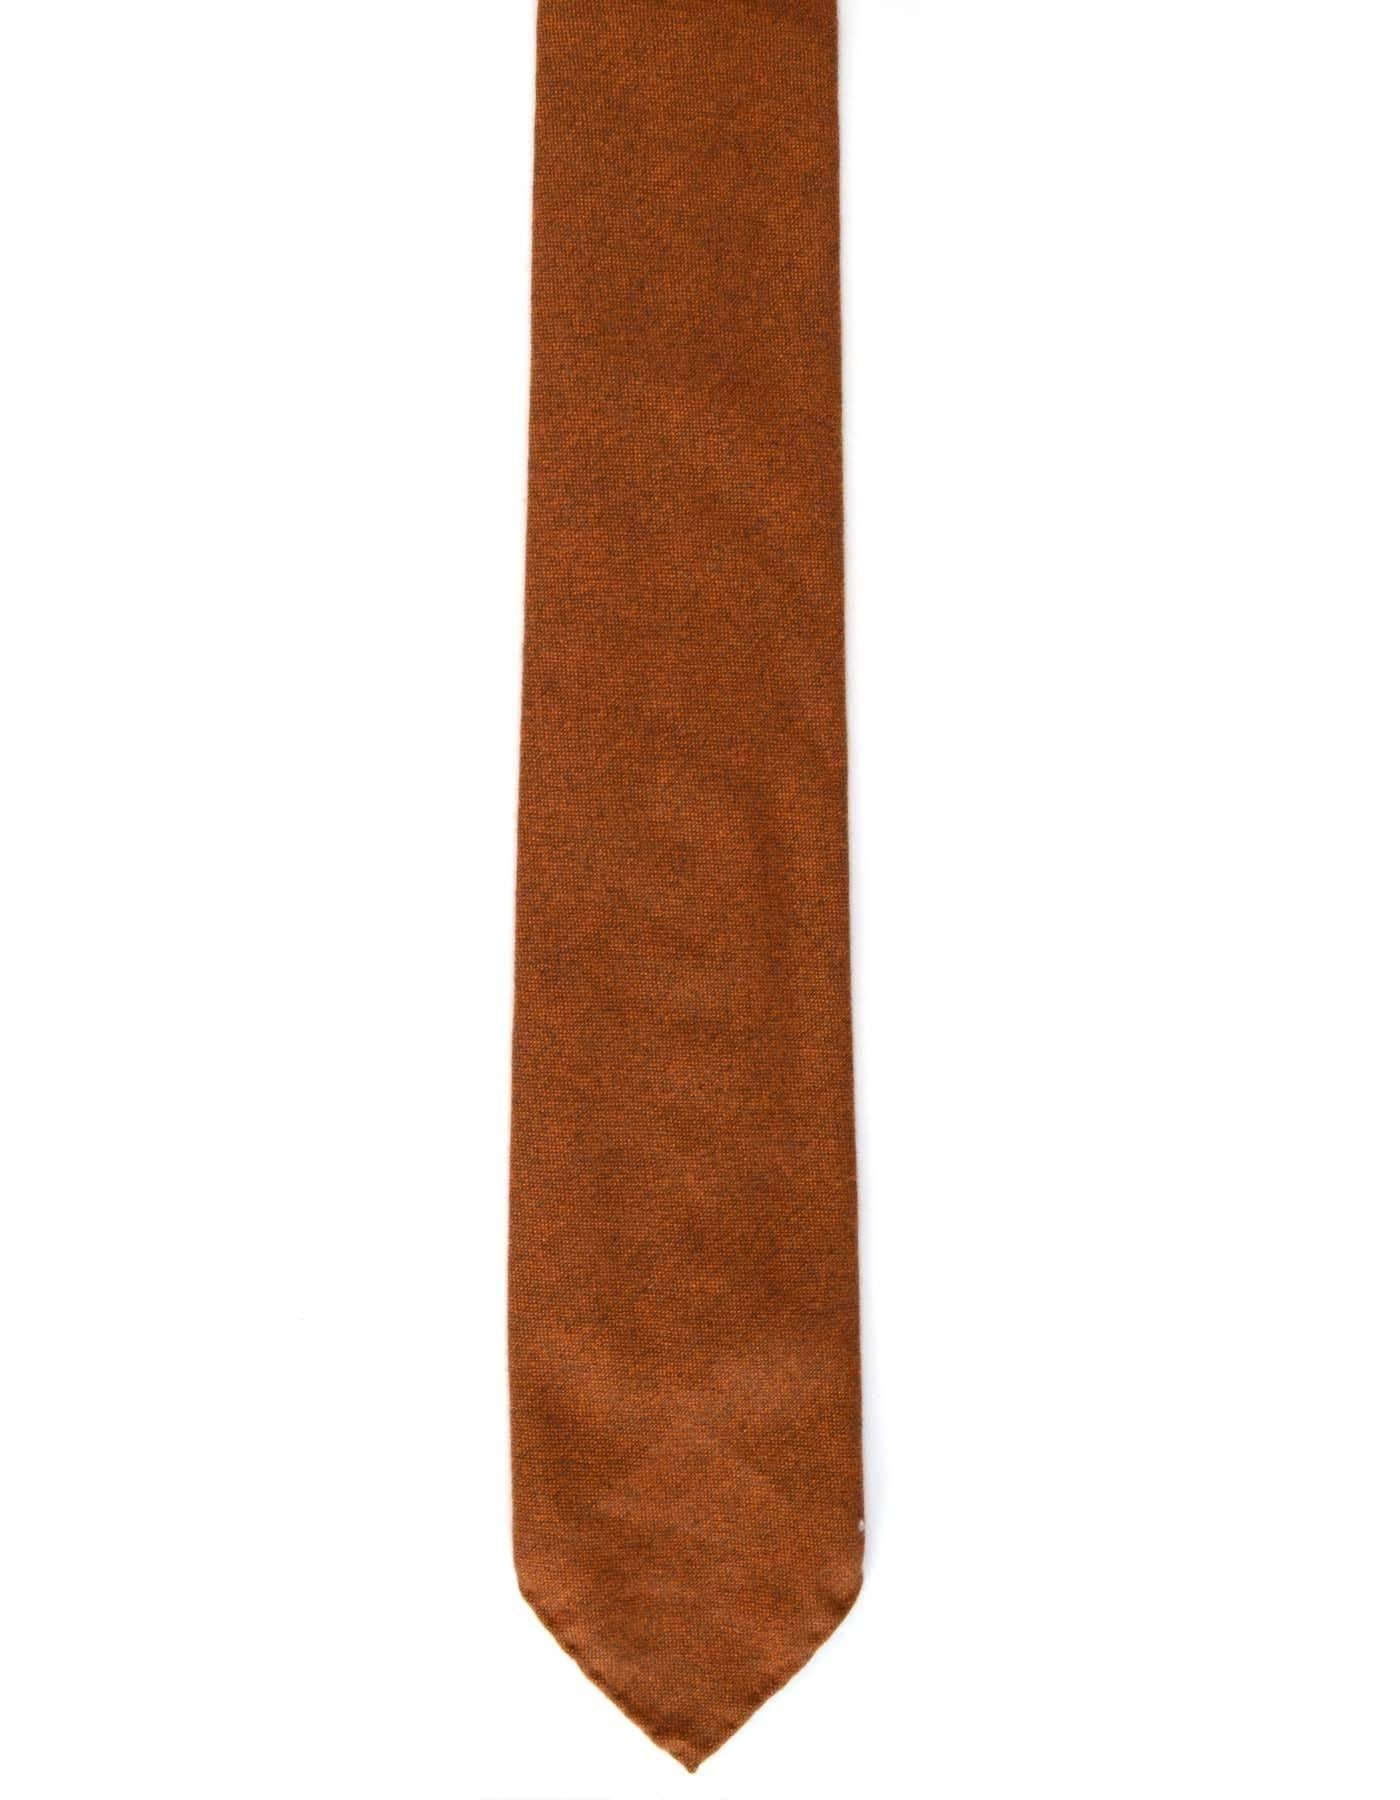 Hermes Burnt Orange Cashmere Tie
Made In: France
Color: Burnt orange
Composition: 100% cashmere
Overall Condition: Excellent pre-owned condition
Measurements: 
Length: 62